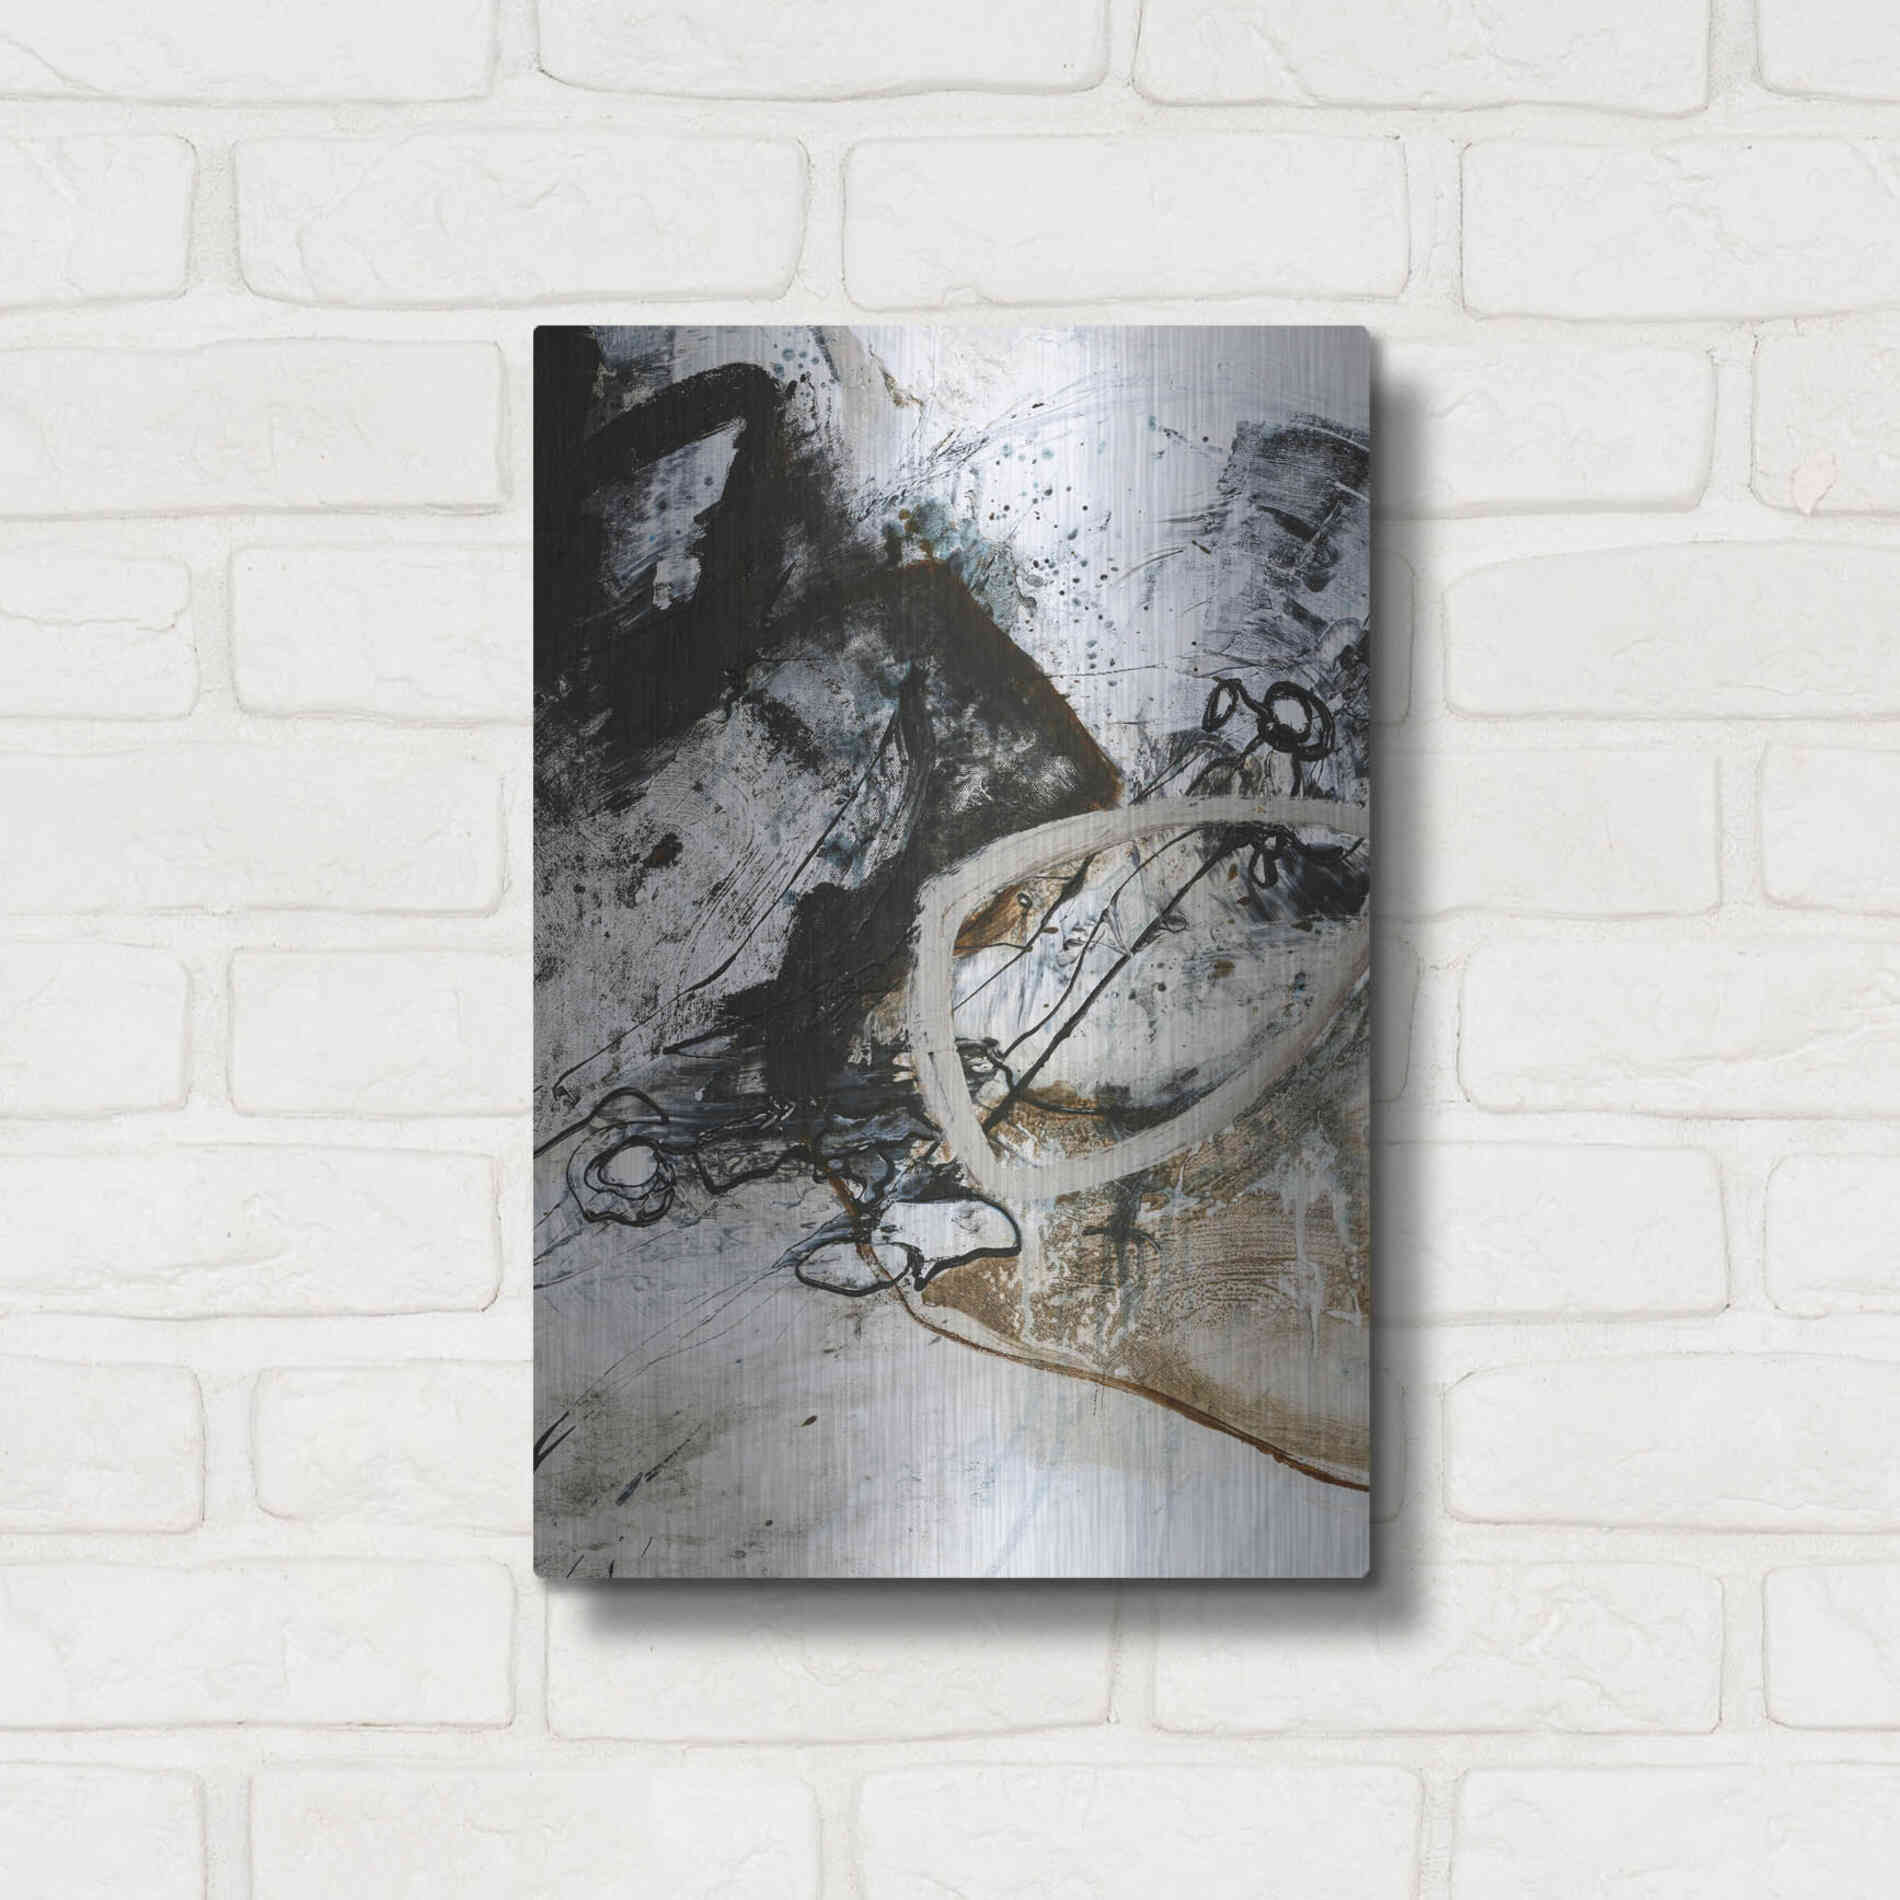 Luxe Metal Art 'Black and White 2' by Design Fabrikken, Metal Wall Art,12x16